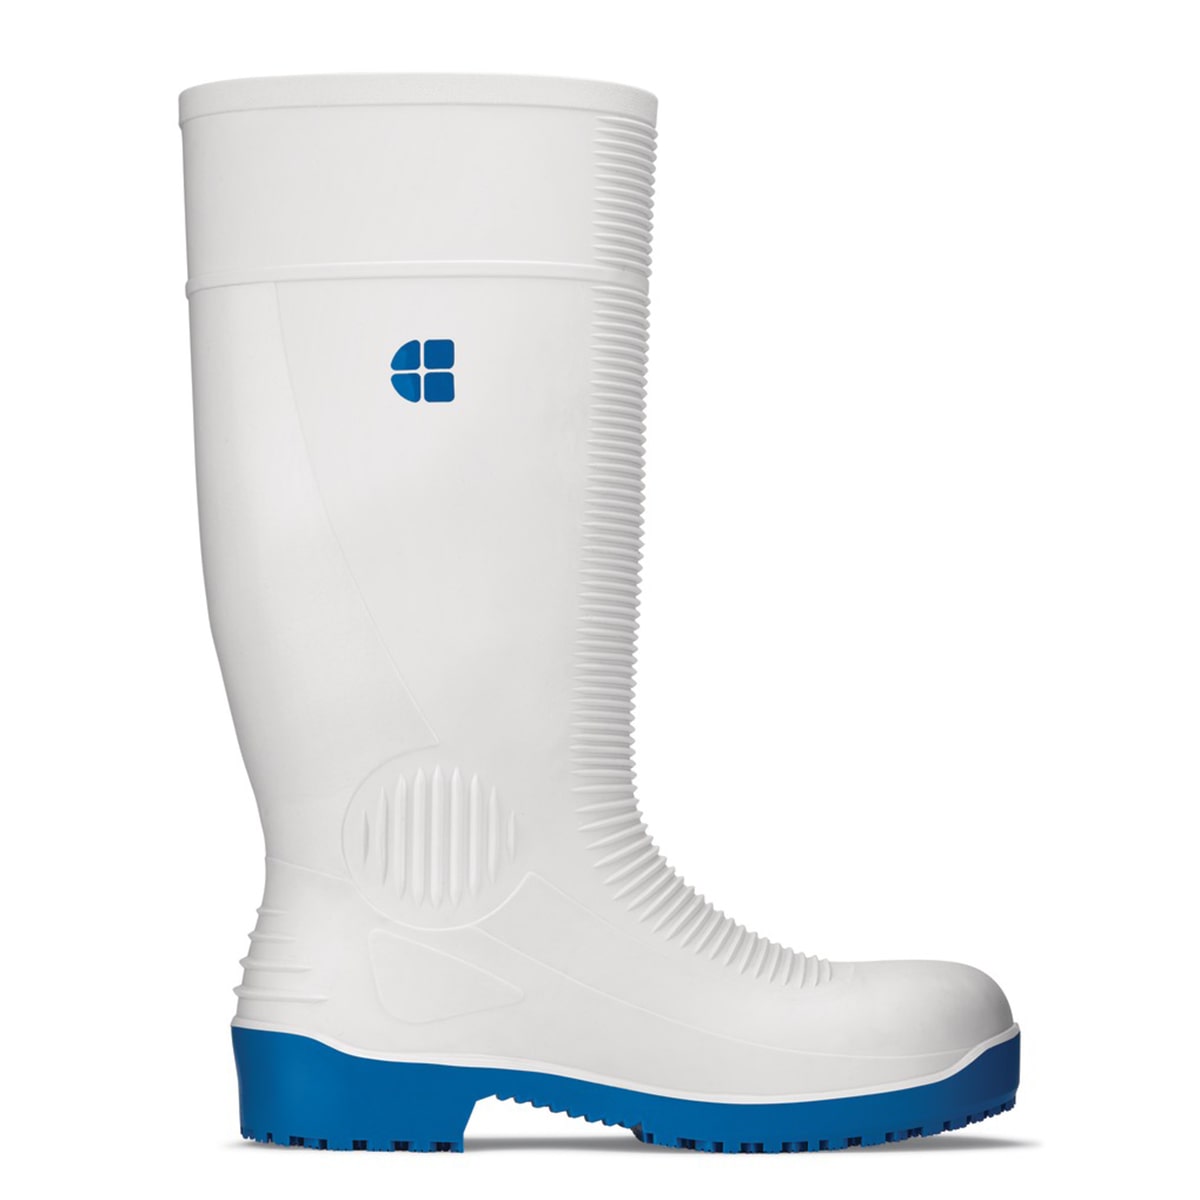 Slip-resistant white wellington boot with steel toe cap (200 Joules) and water-resistant upper, seen from the right.